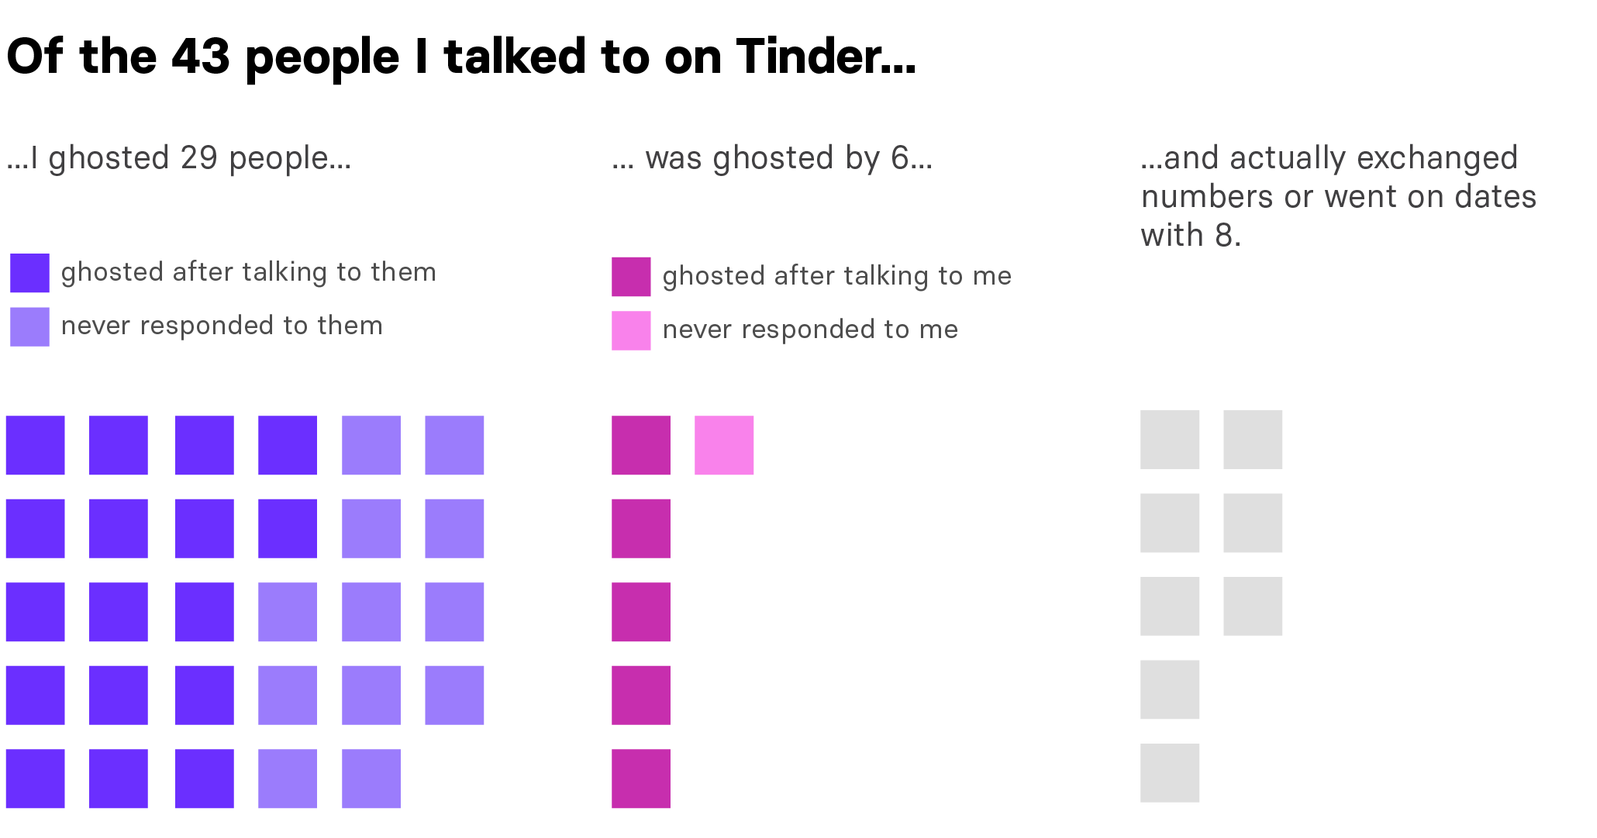 Ghosting auf dating-apps